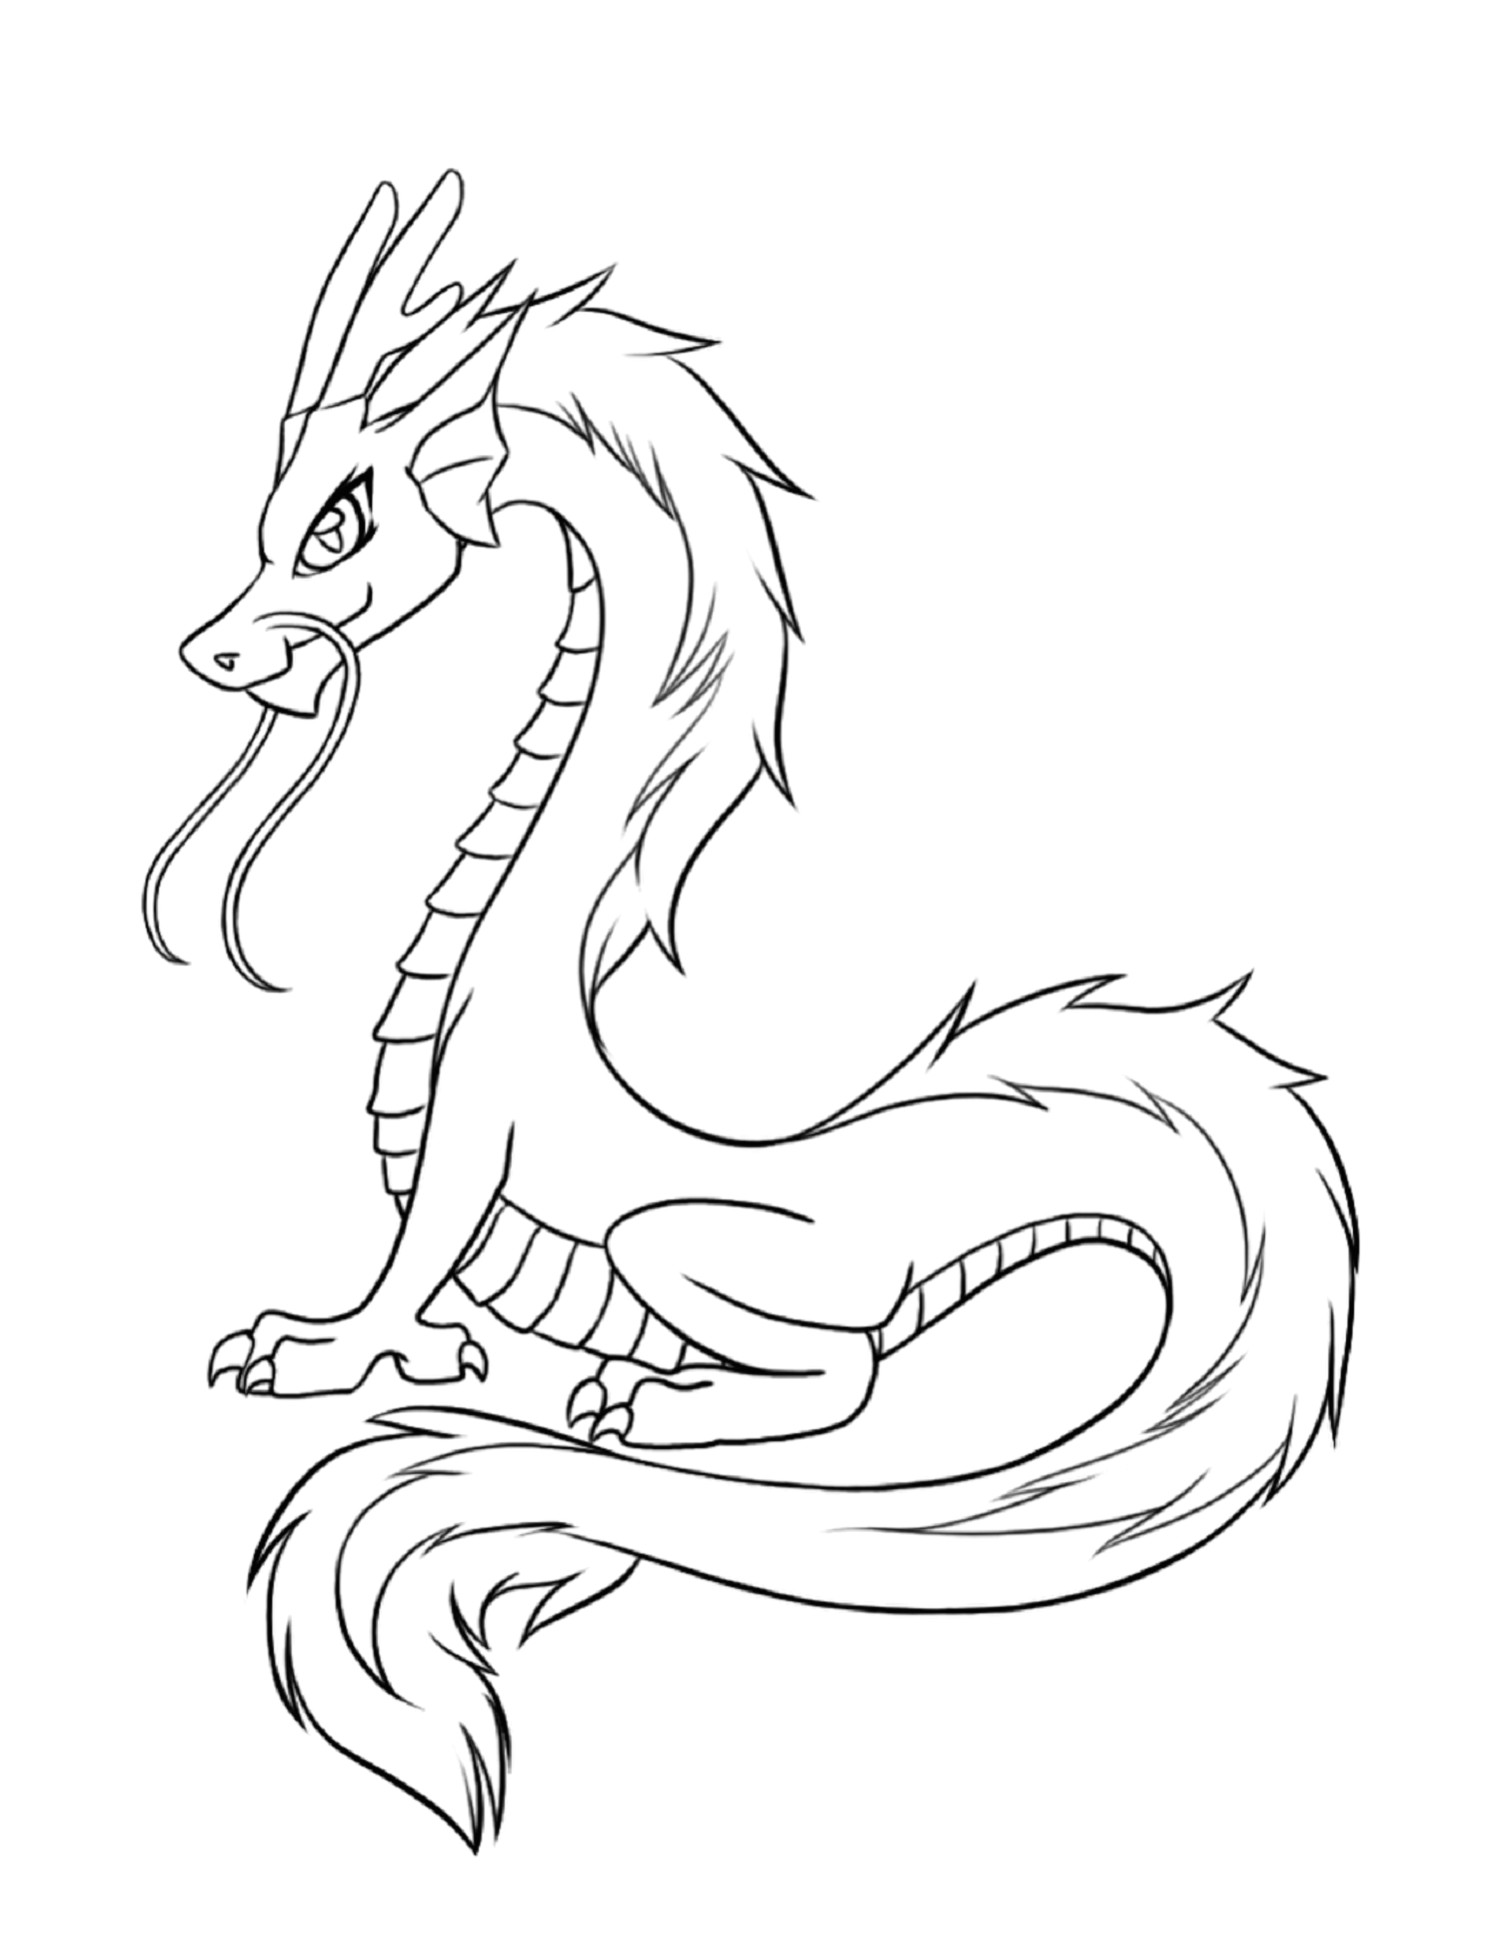 Drawings Of Dragons In Color Dragon Coloring Pages for Fun Coloring Kids Activity Coloring